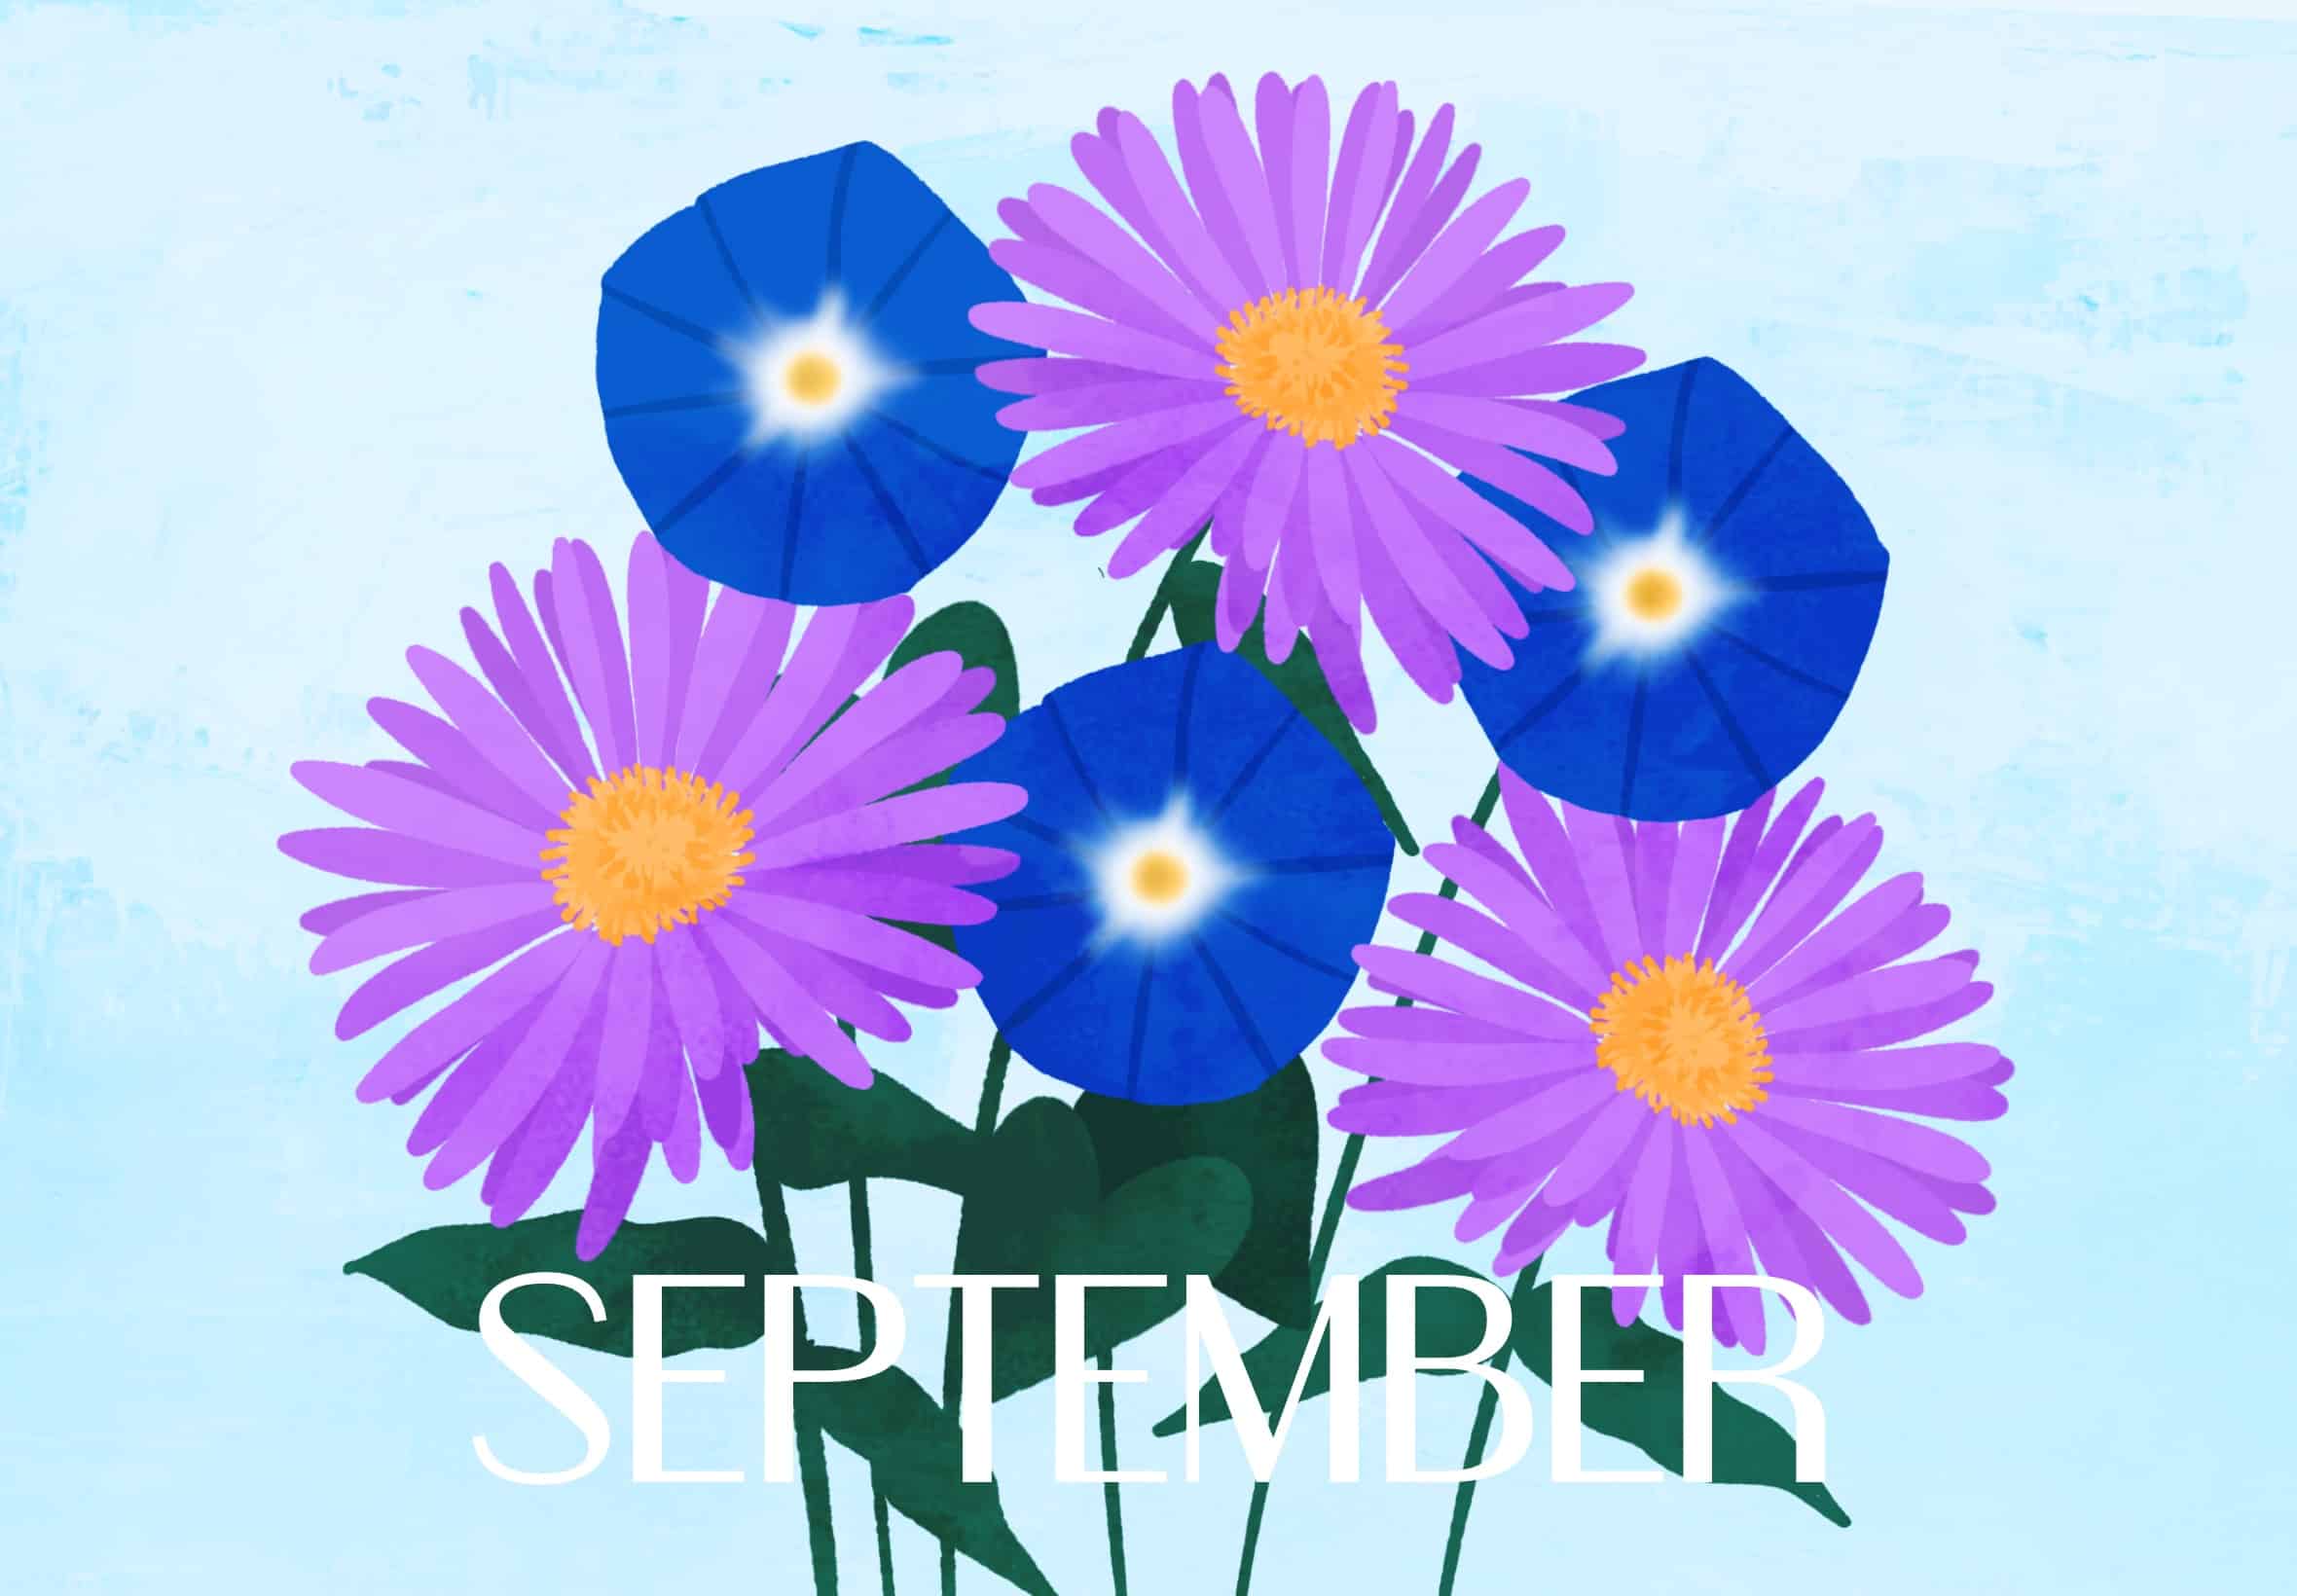 September Birth Month Flowers - Aster and Morning Glory